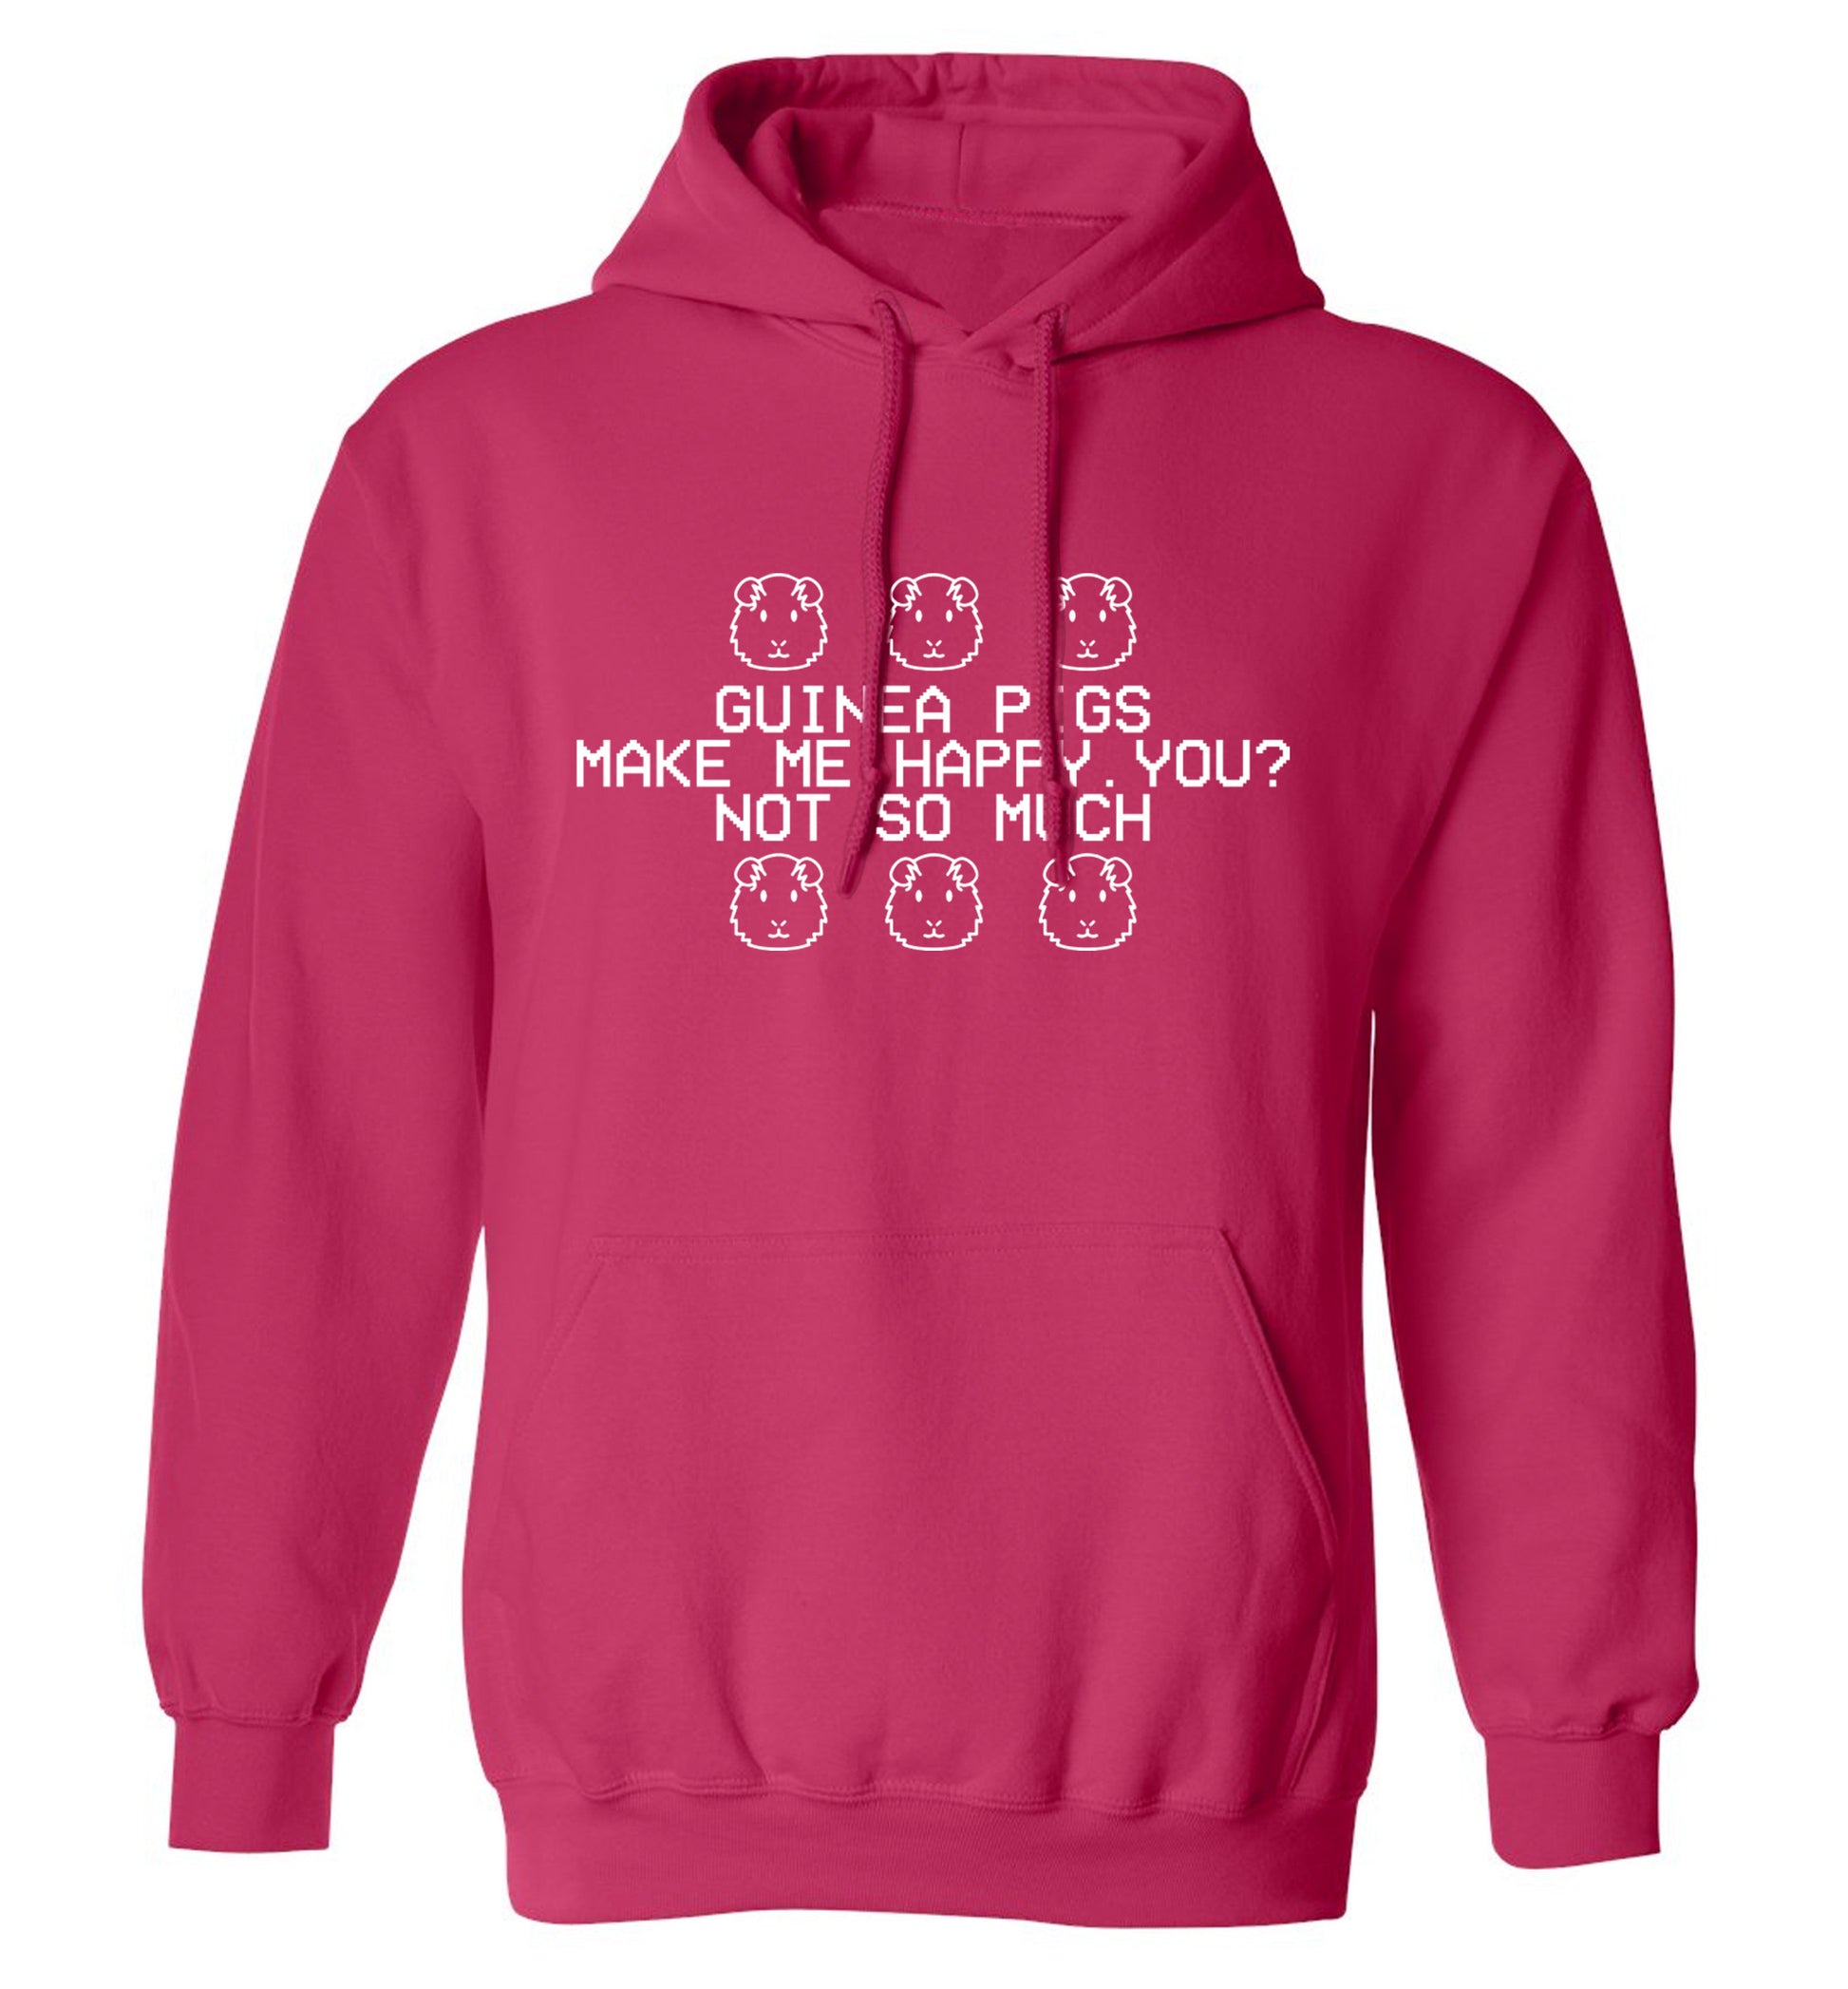 Guinea pigs make me happy, you not so much adults unisex pink hoodie 2XL